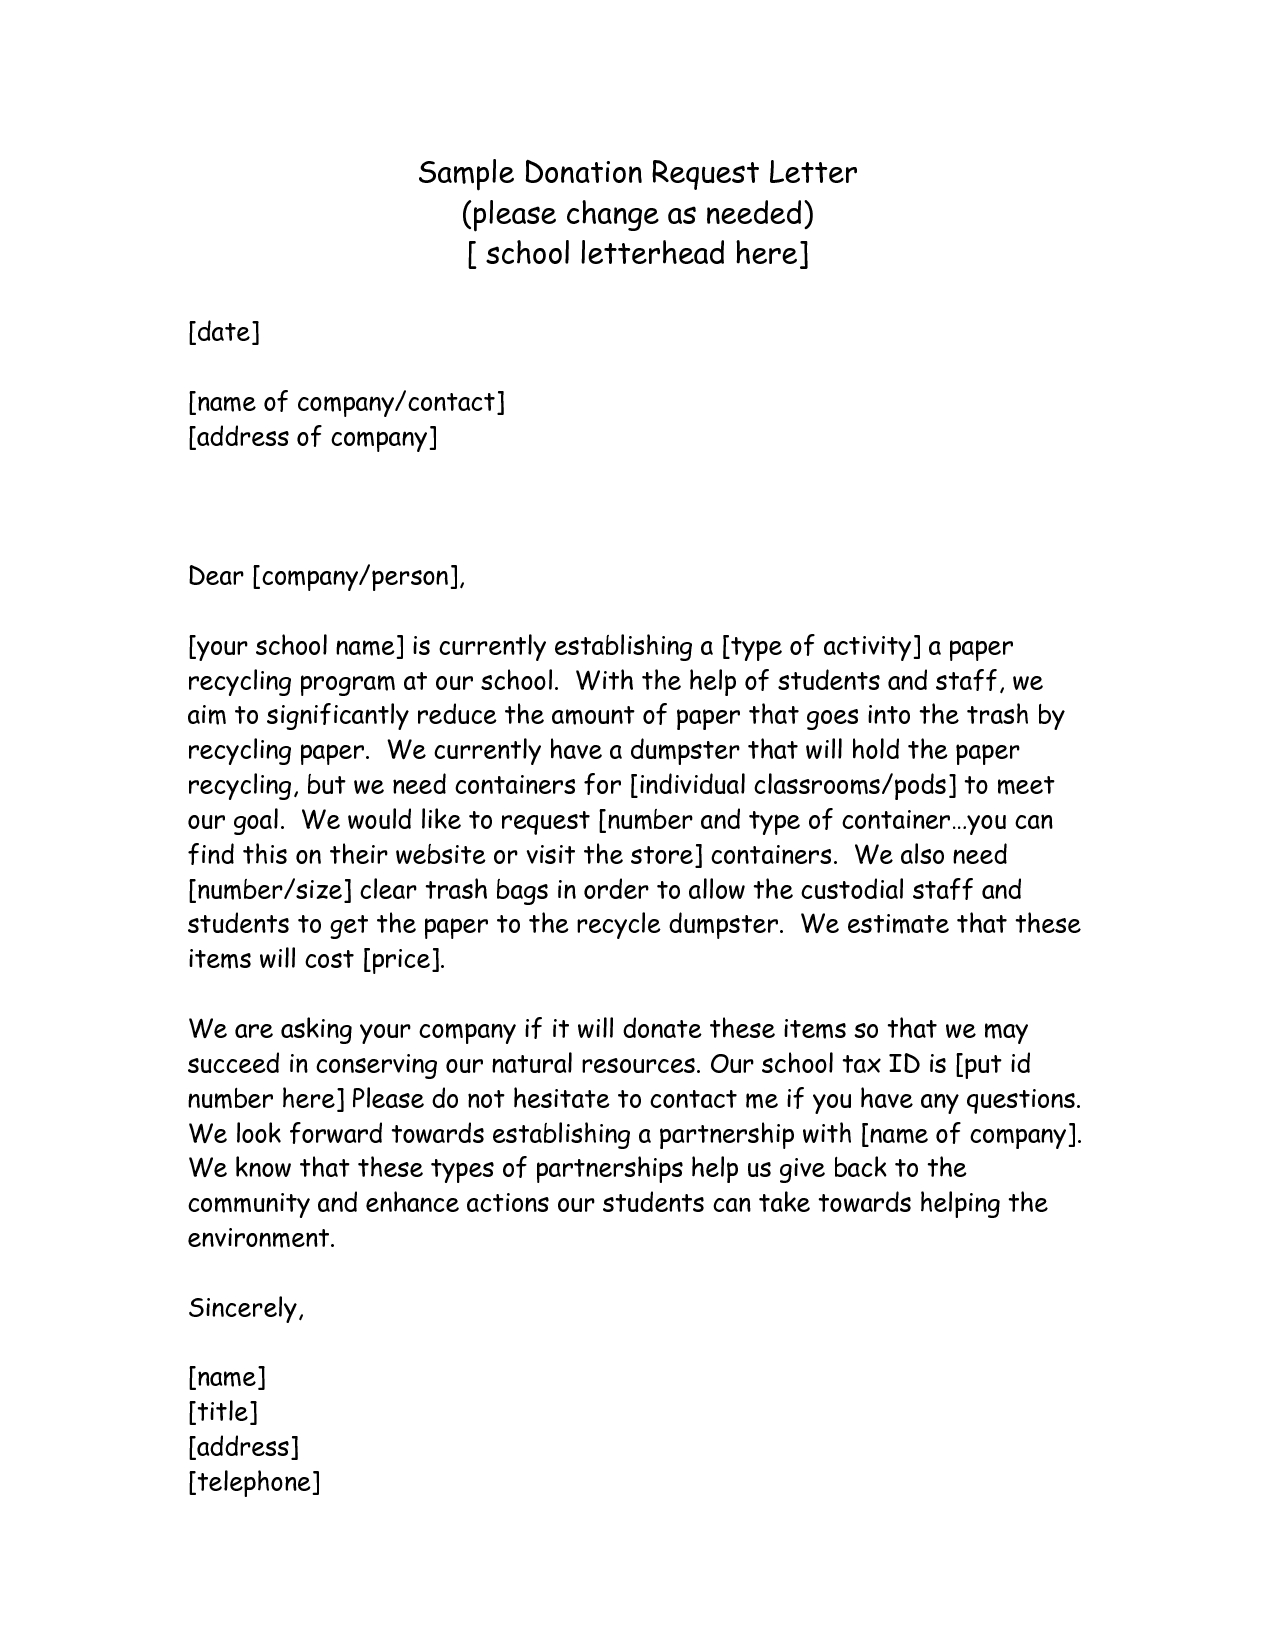 Fundraising Request for Donation Letter Template - Examples for Donation Letters